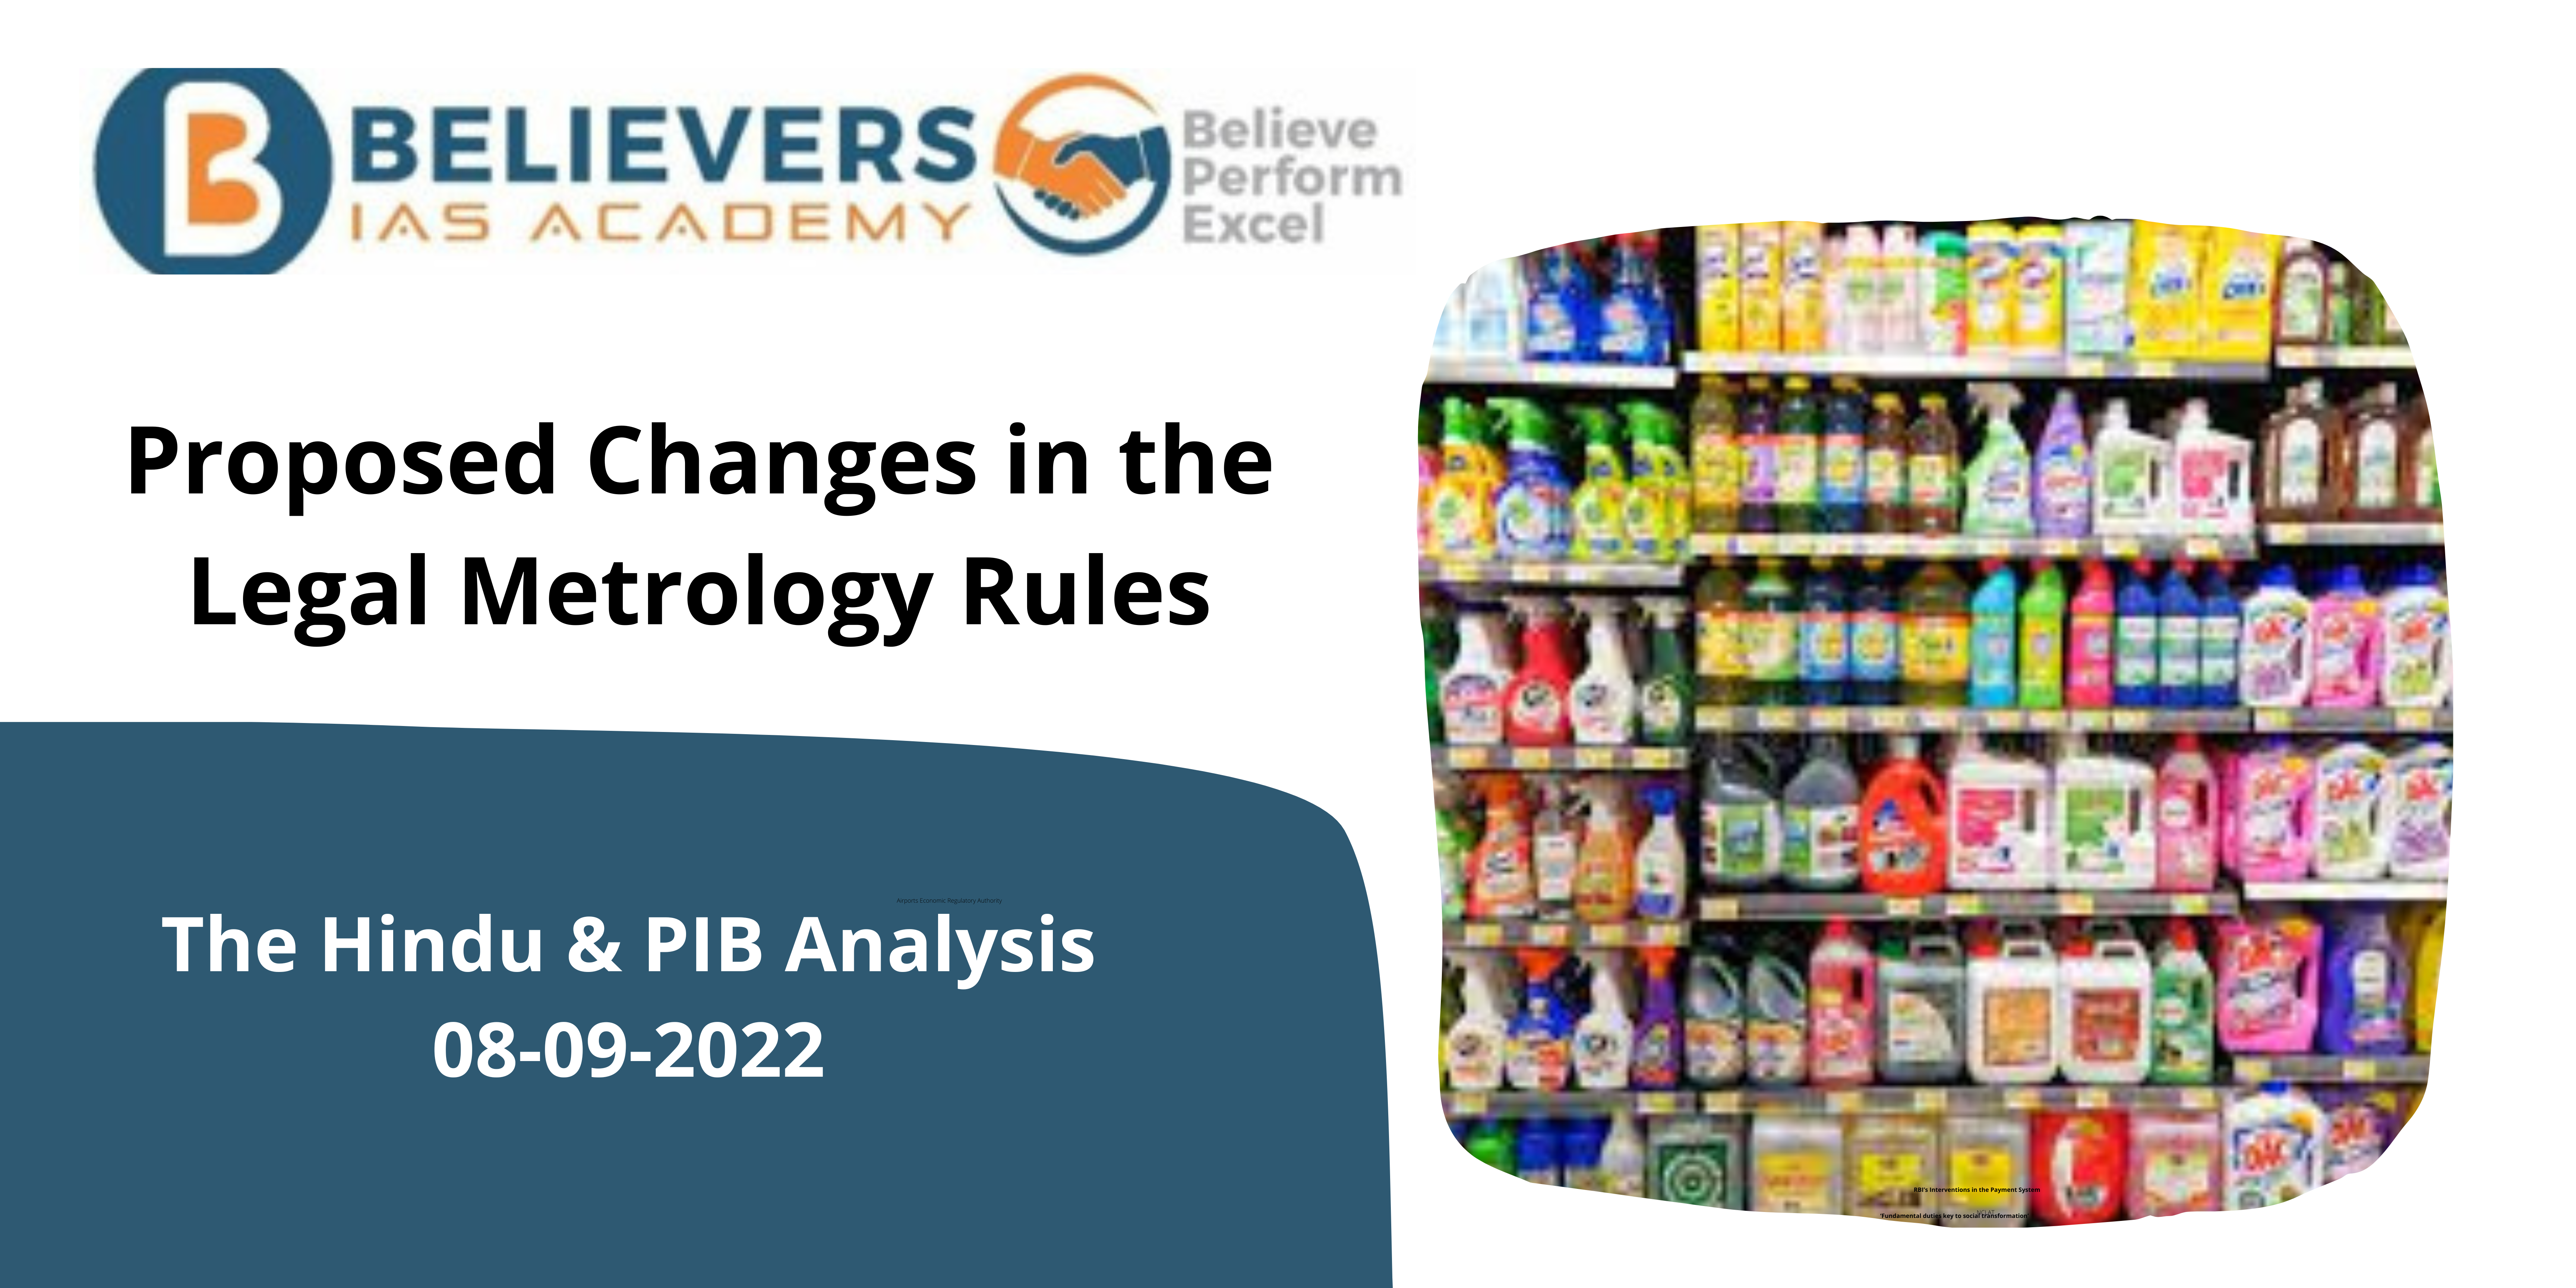 Proposed Changes in the Legal Metrology Rules